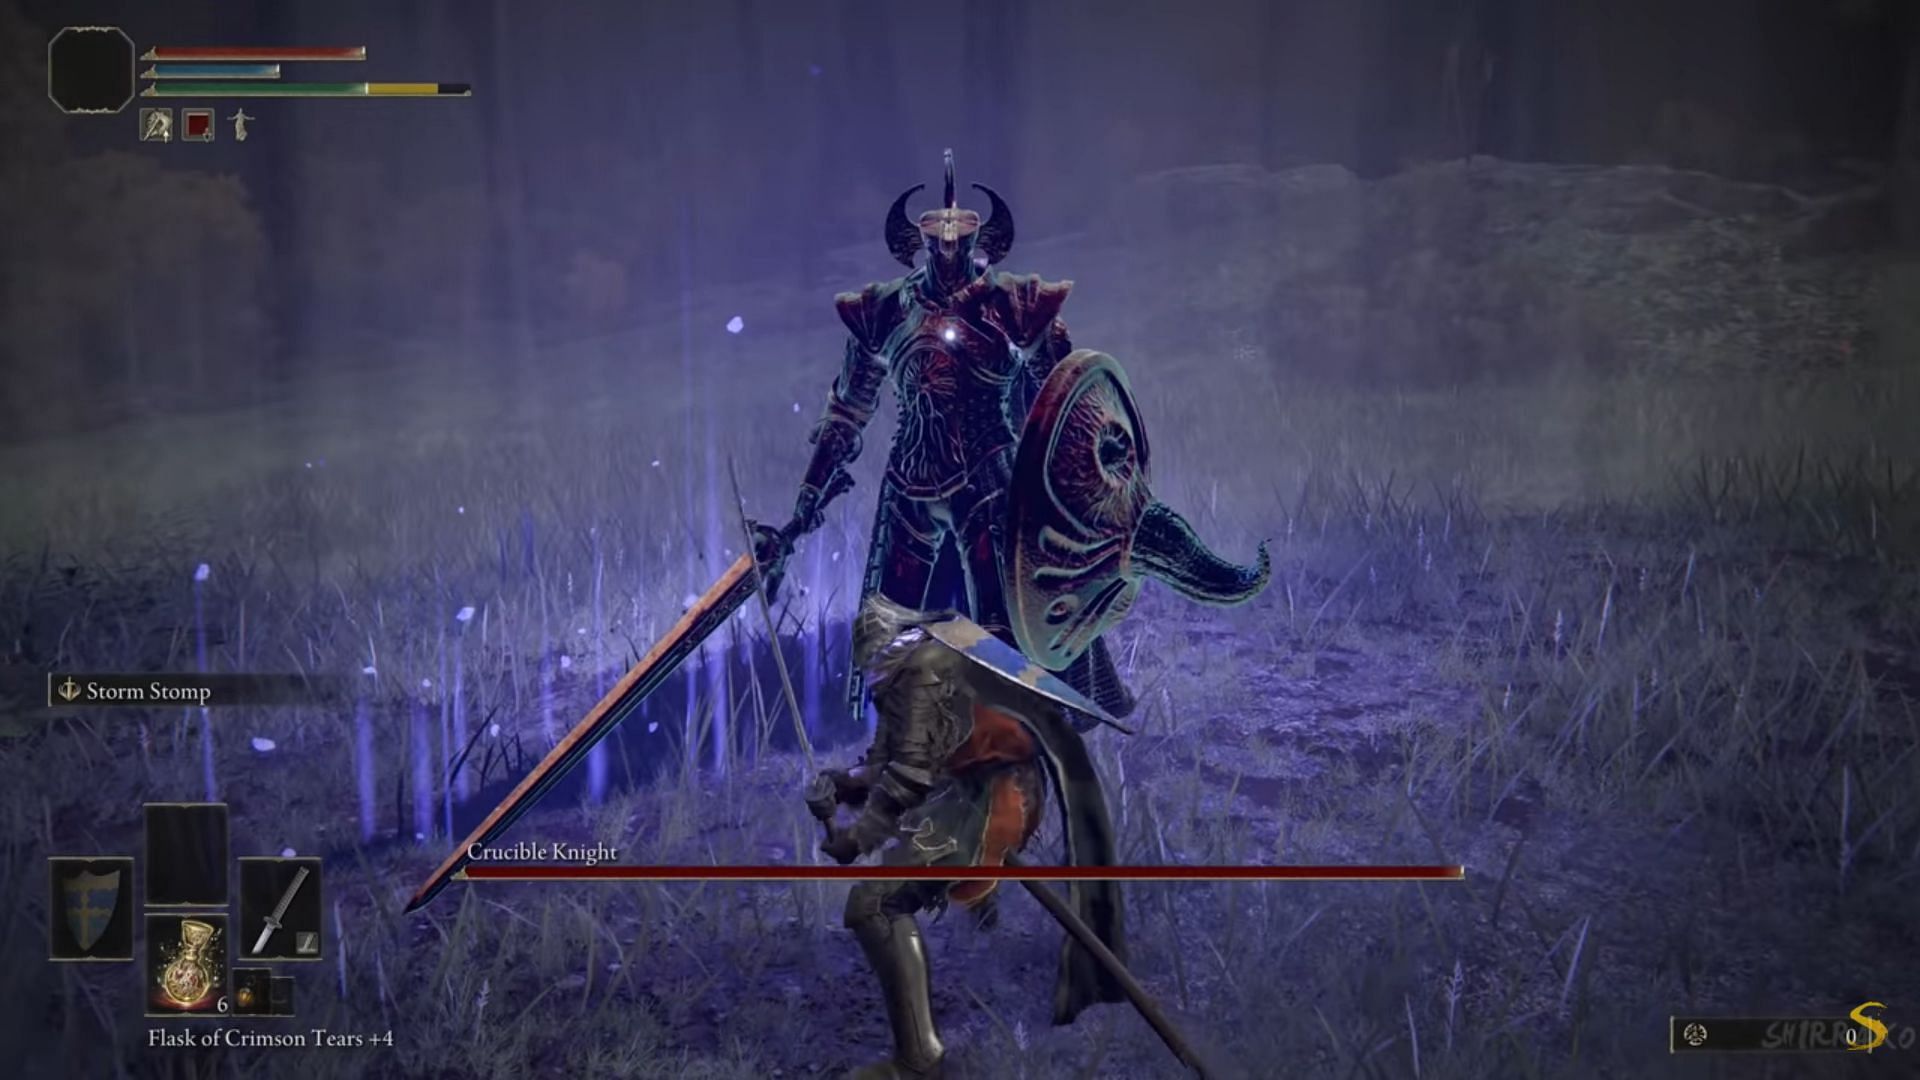 Fighting the Crucible Knight in the early game is extremely difficult in Elden Ring (Image via Shirrako/Youtube)